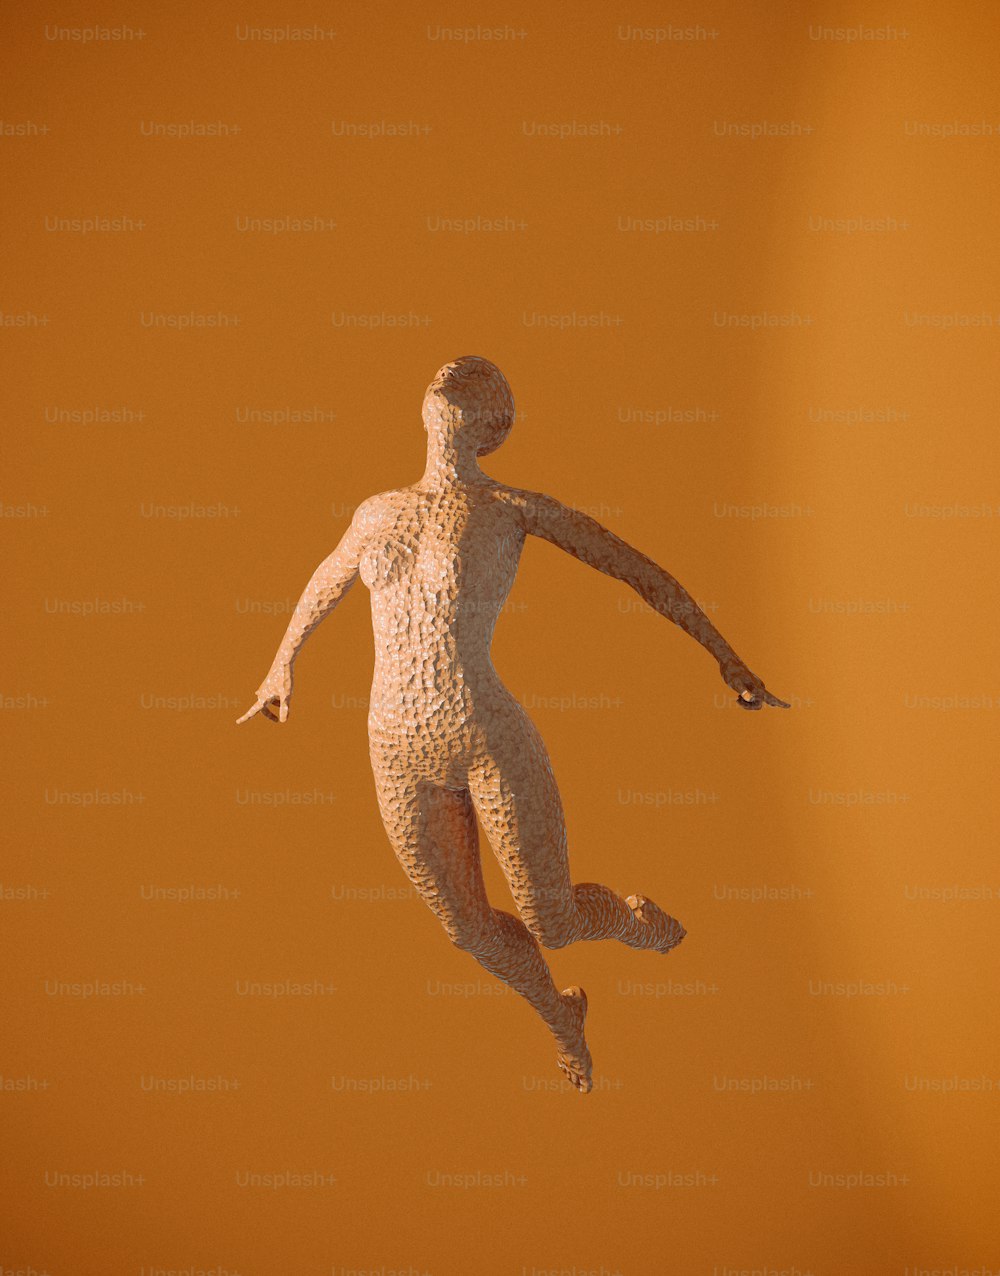 a statue of a man flying through the air